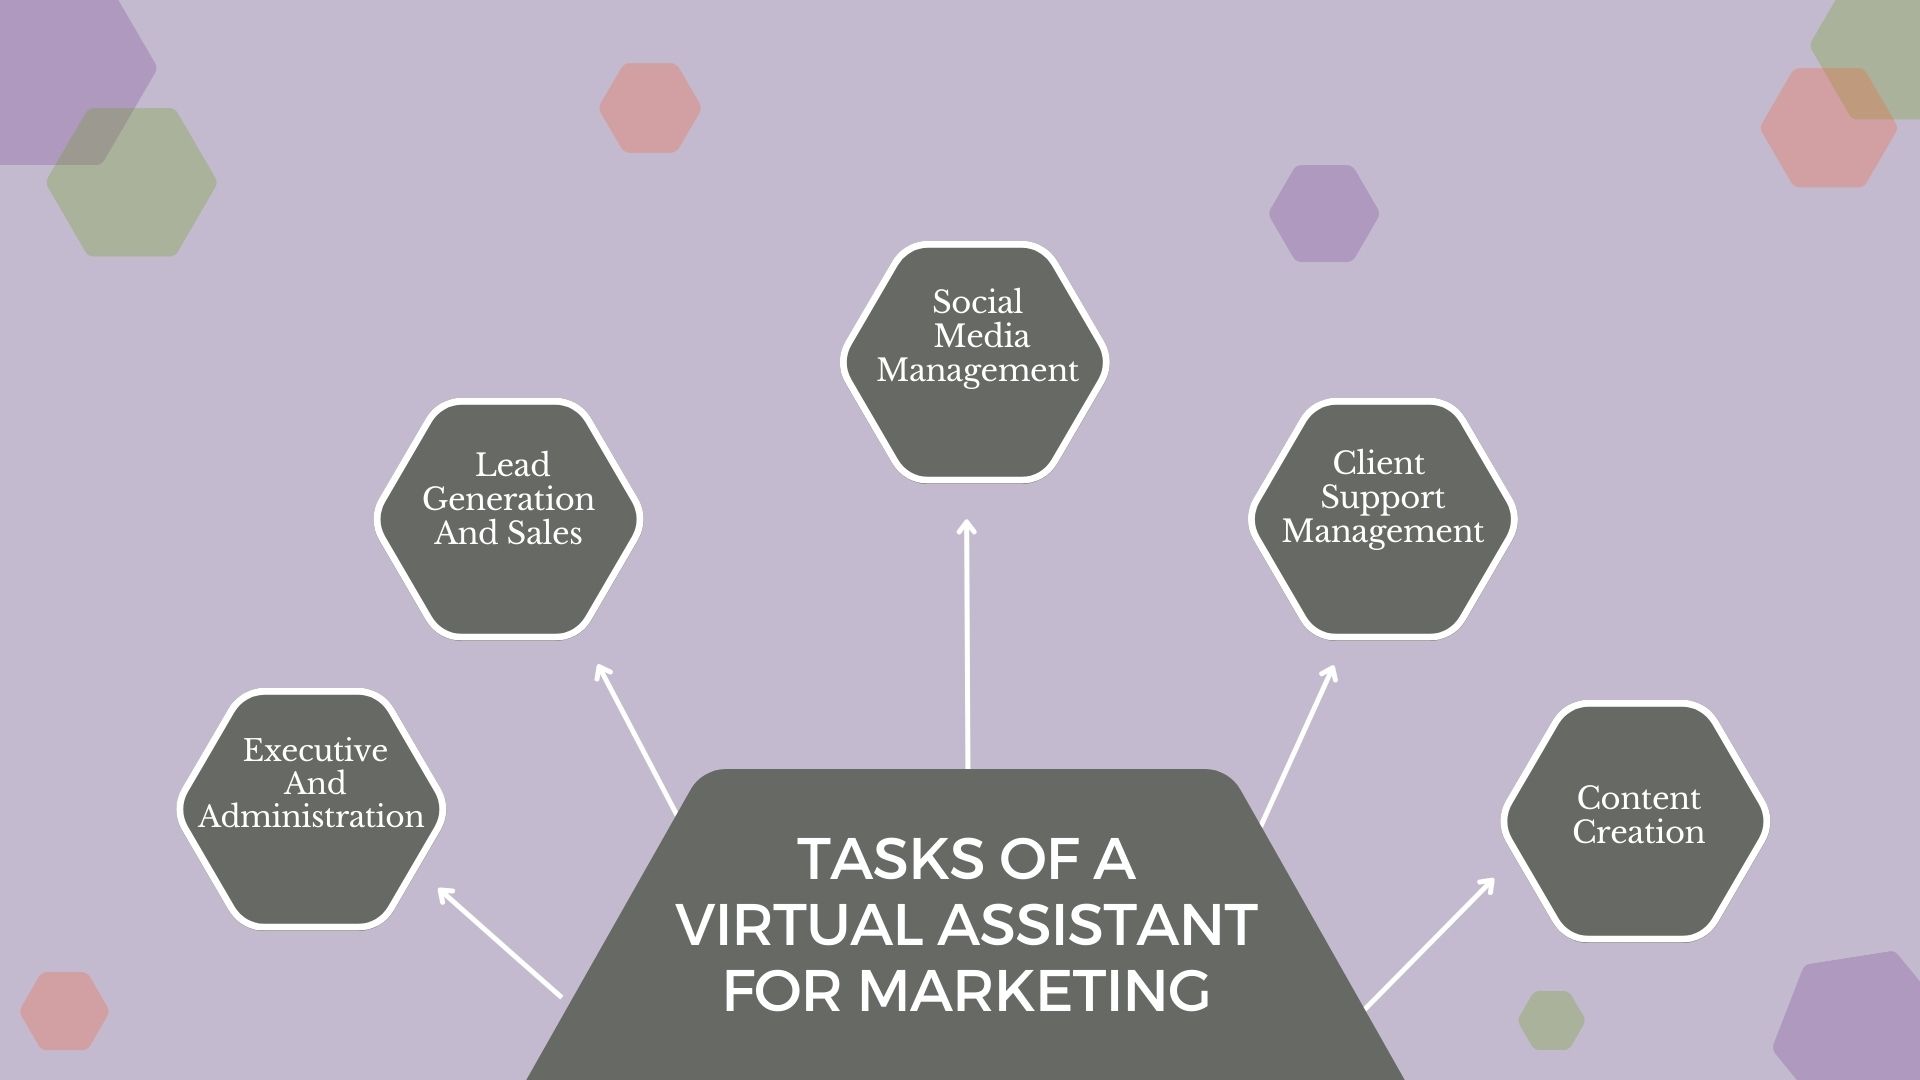 Tasks of a Virtual Assistant for Marketing